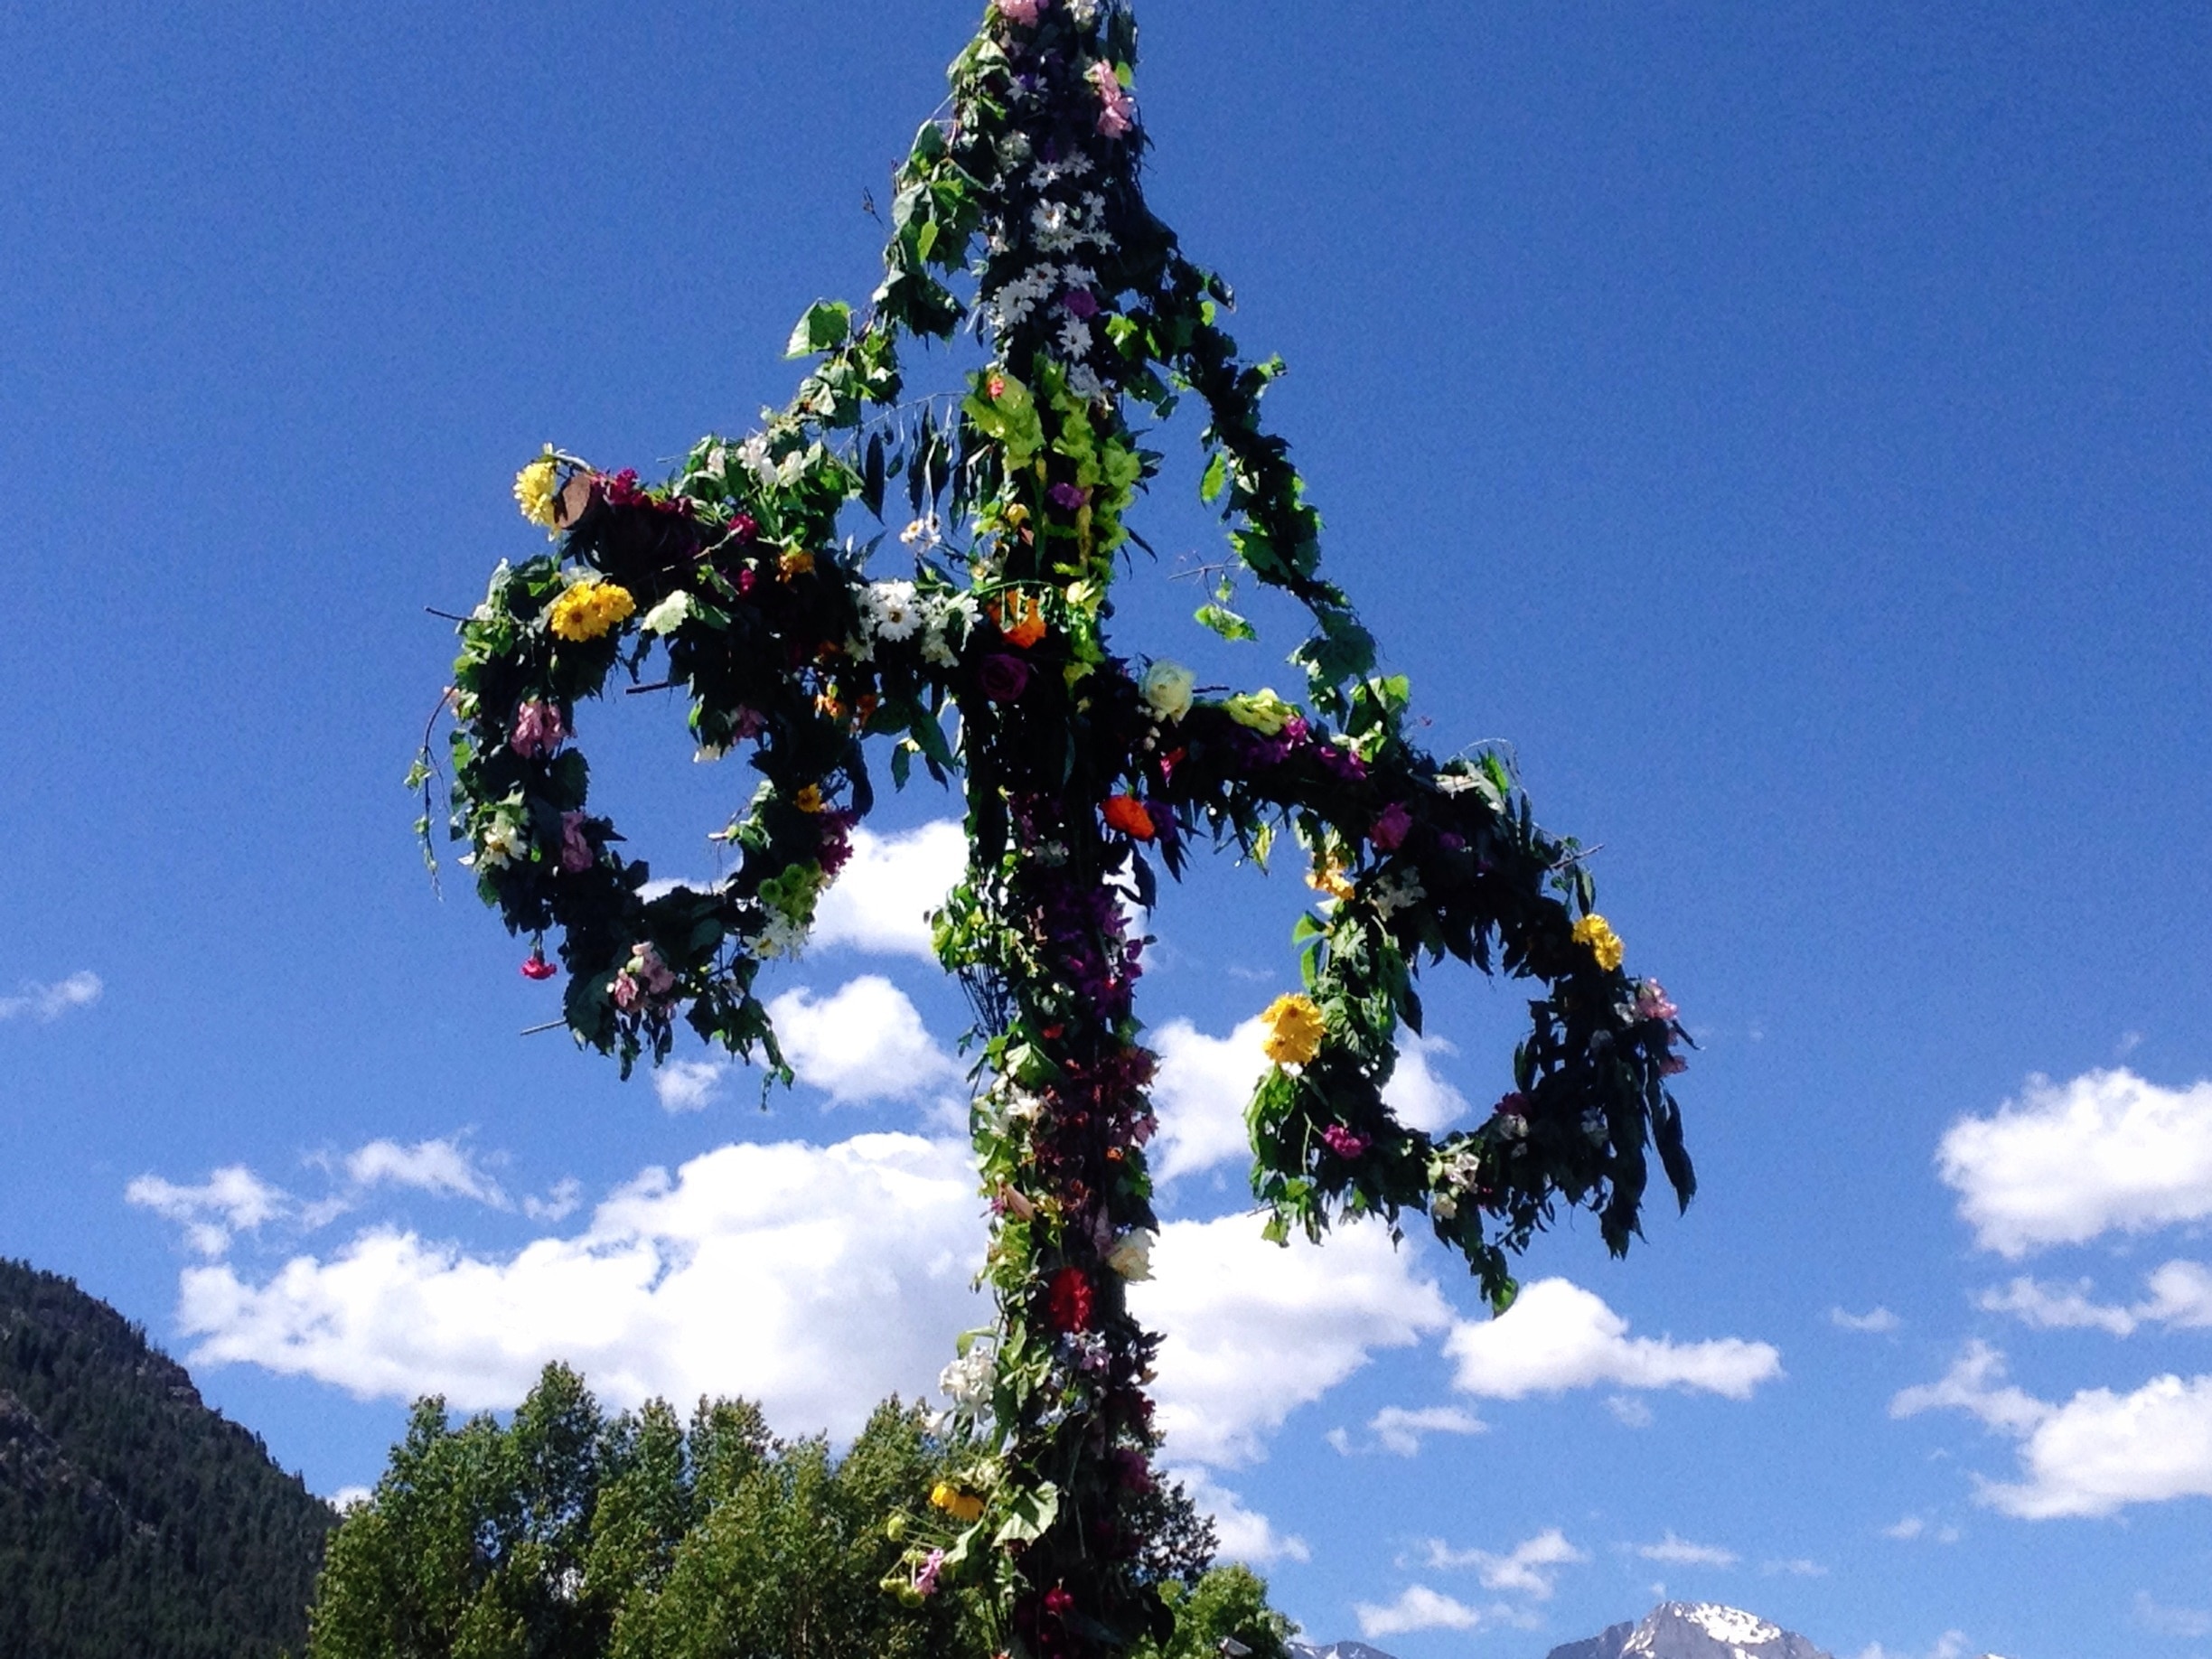 Scandinavian Midsummer Festival the last weekend in June. Celebrate Viking history with music, crafts, dancing and leffse! 

Every weekend in #EstesPark there is some celebration to join in on :) 